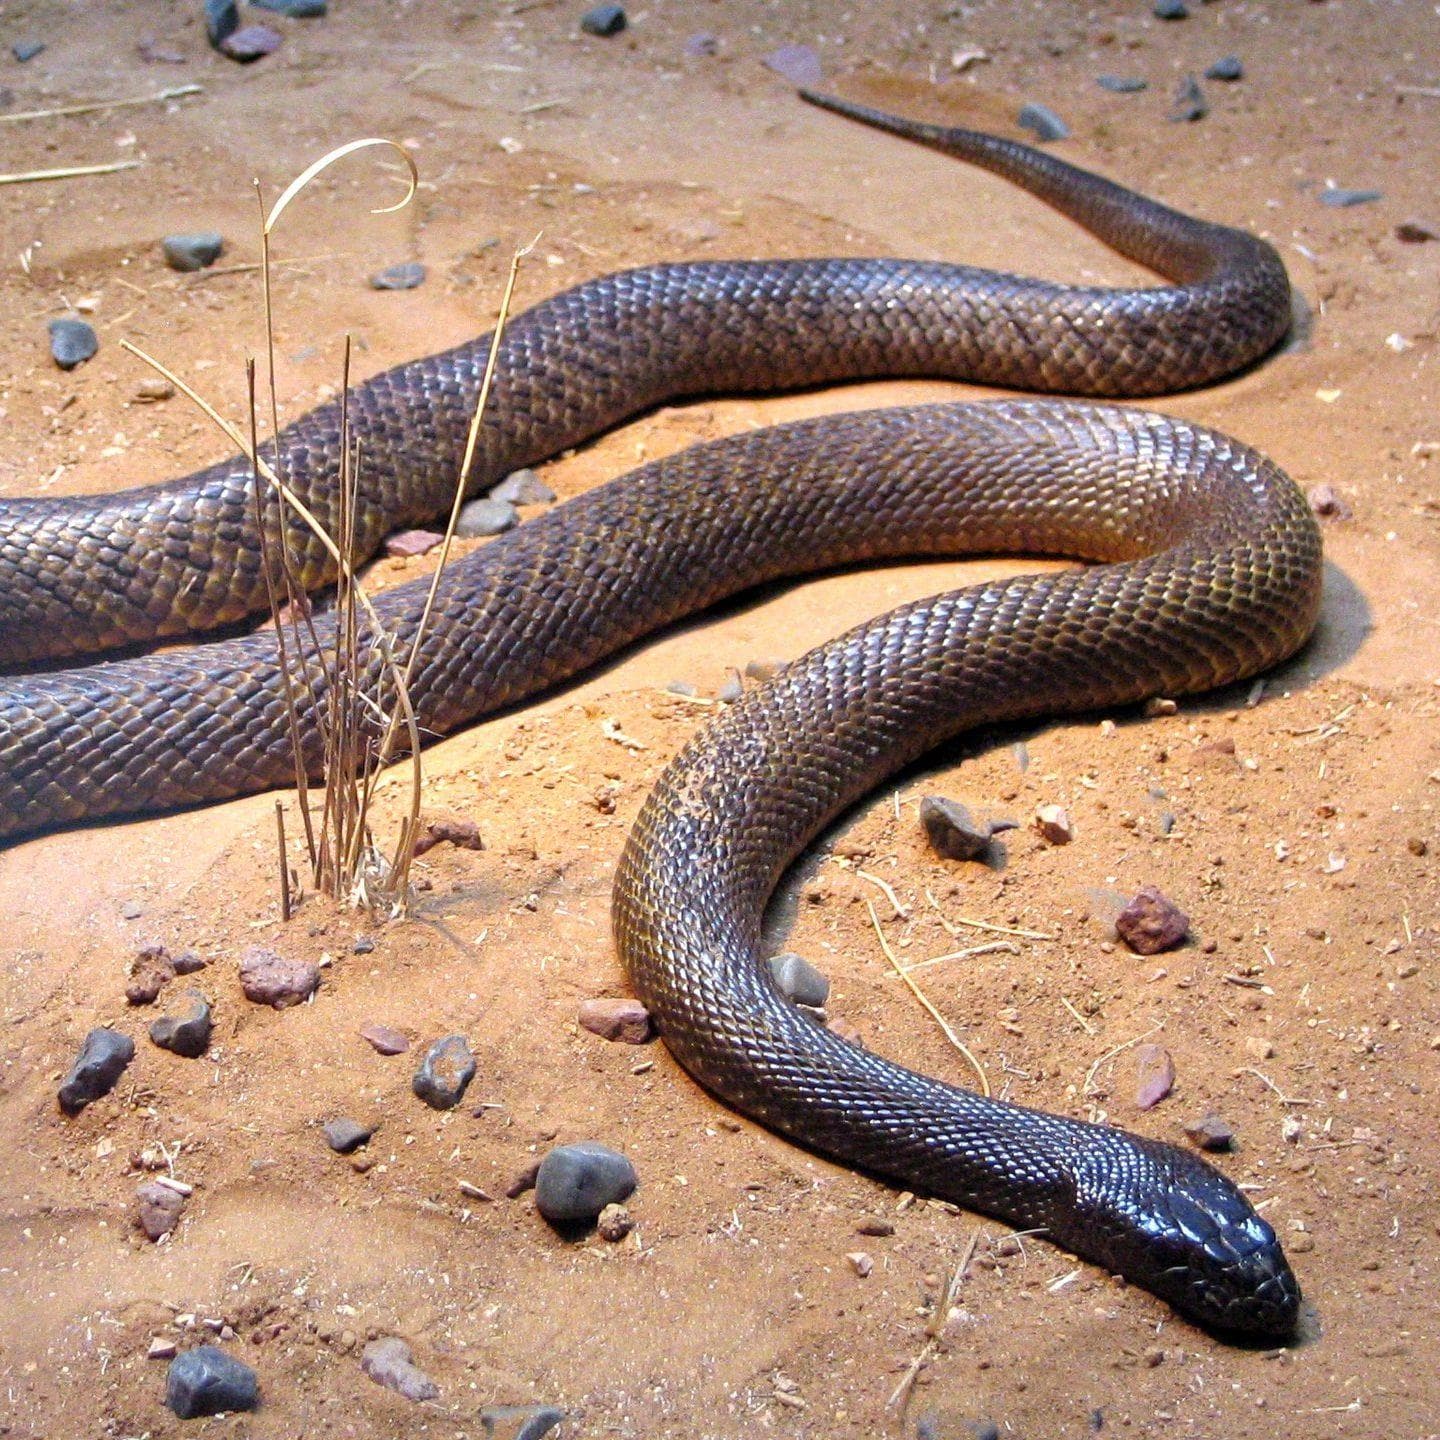 Random Scariest Types of Snakes in the World